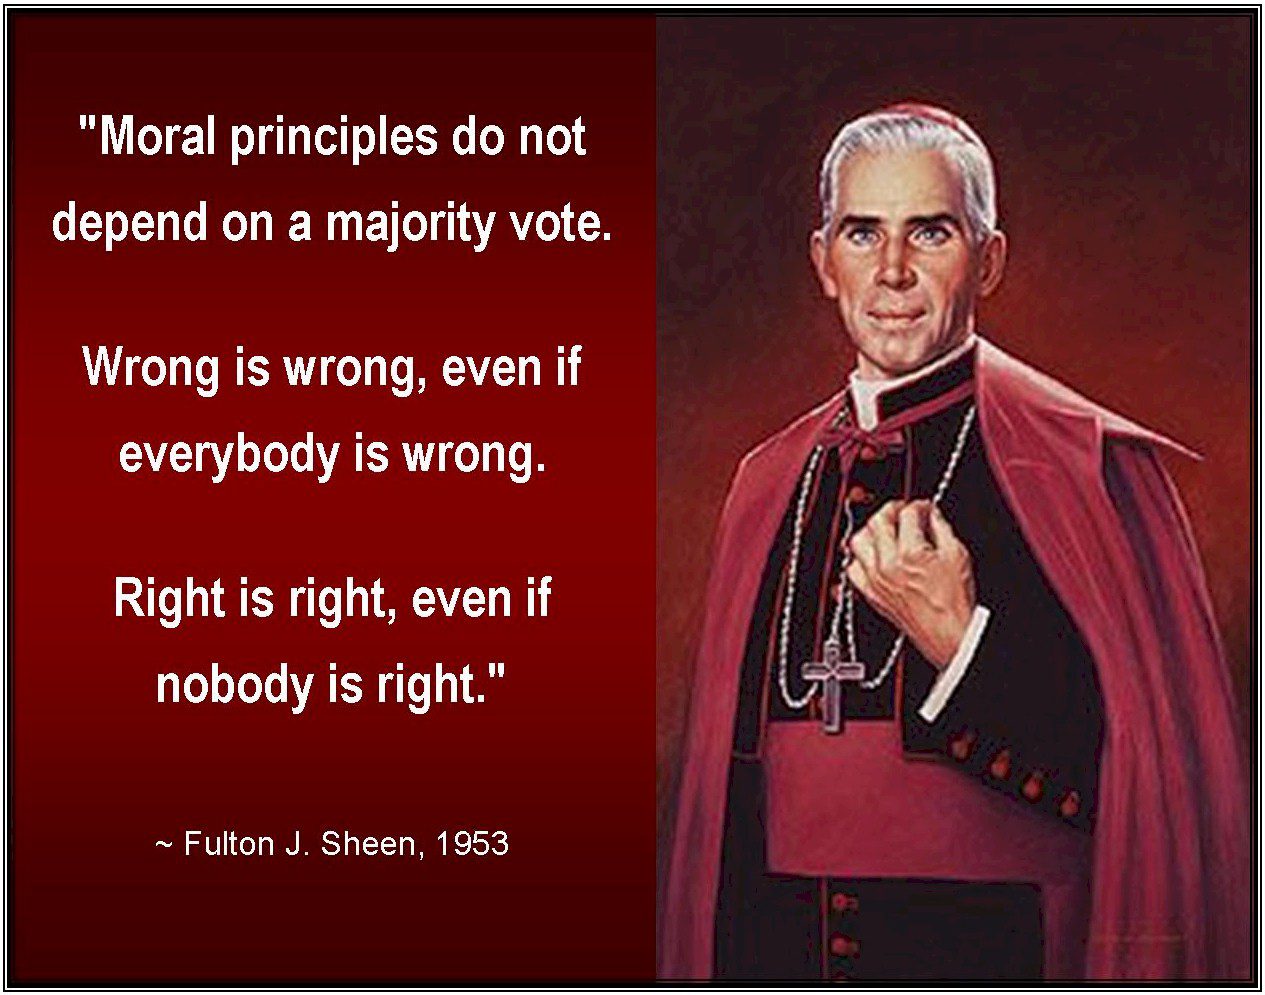 Vote according to right or wrong, not majority!